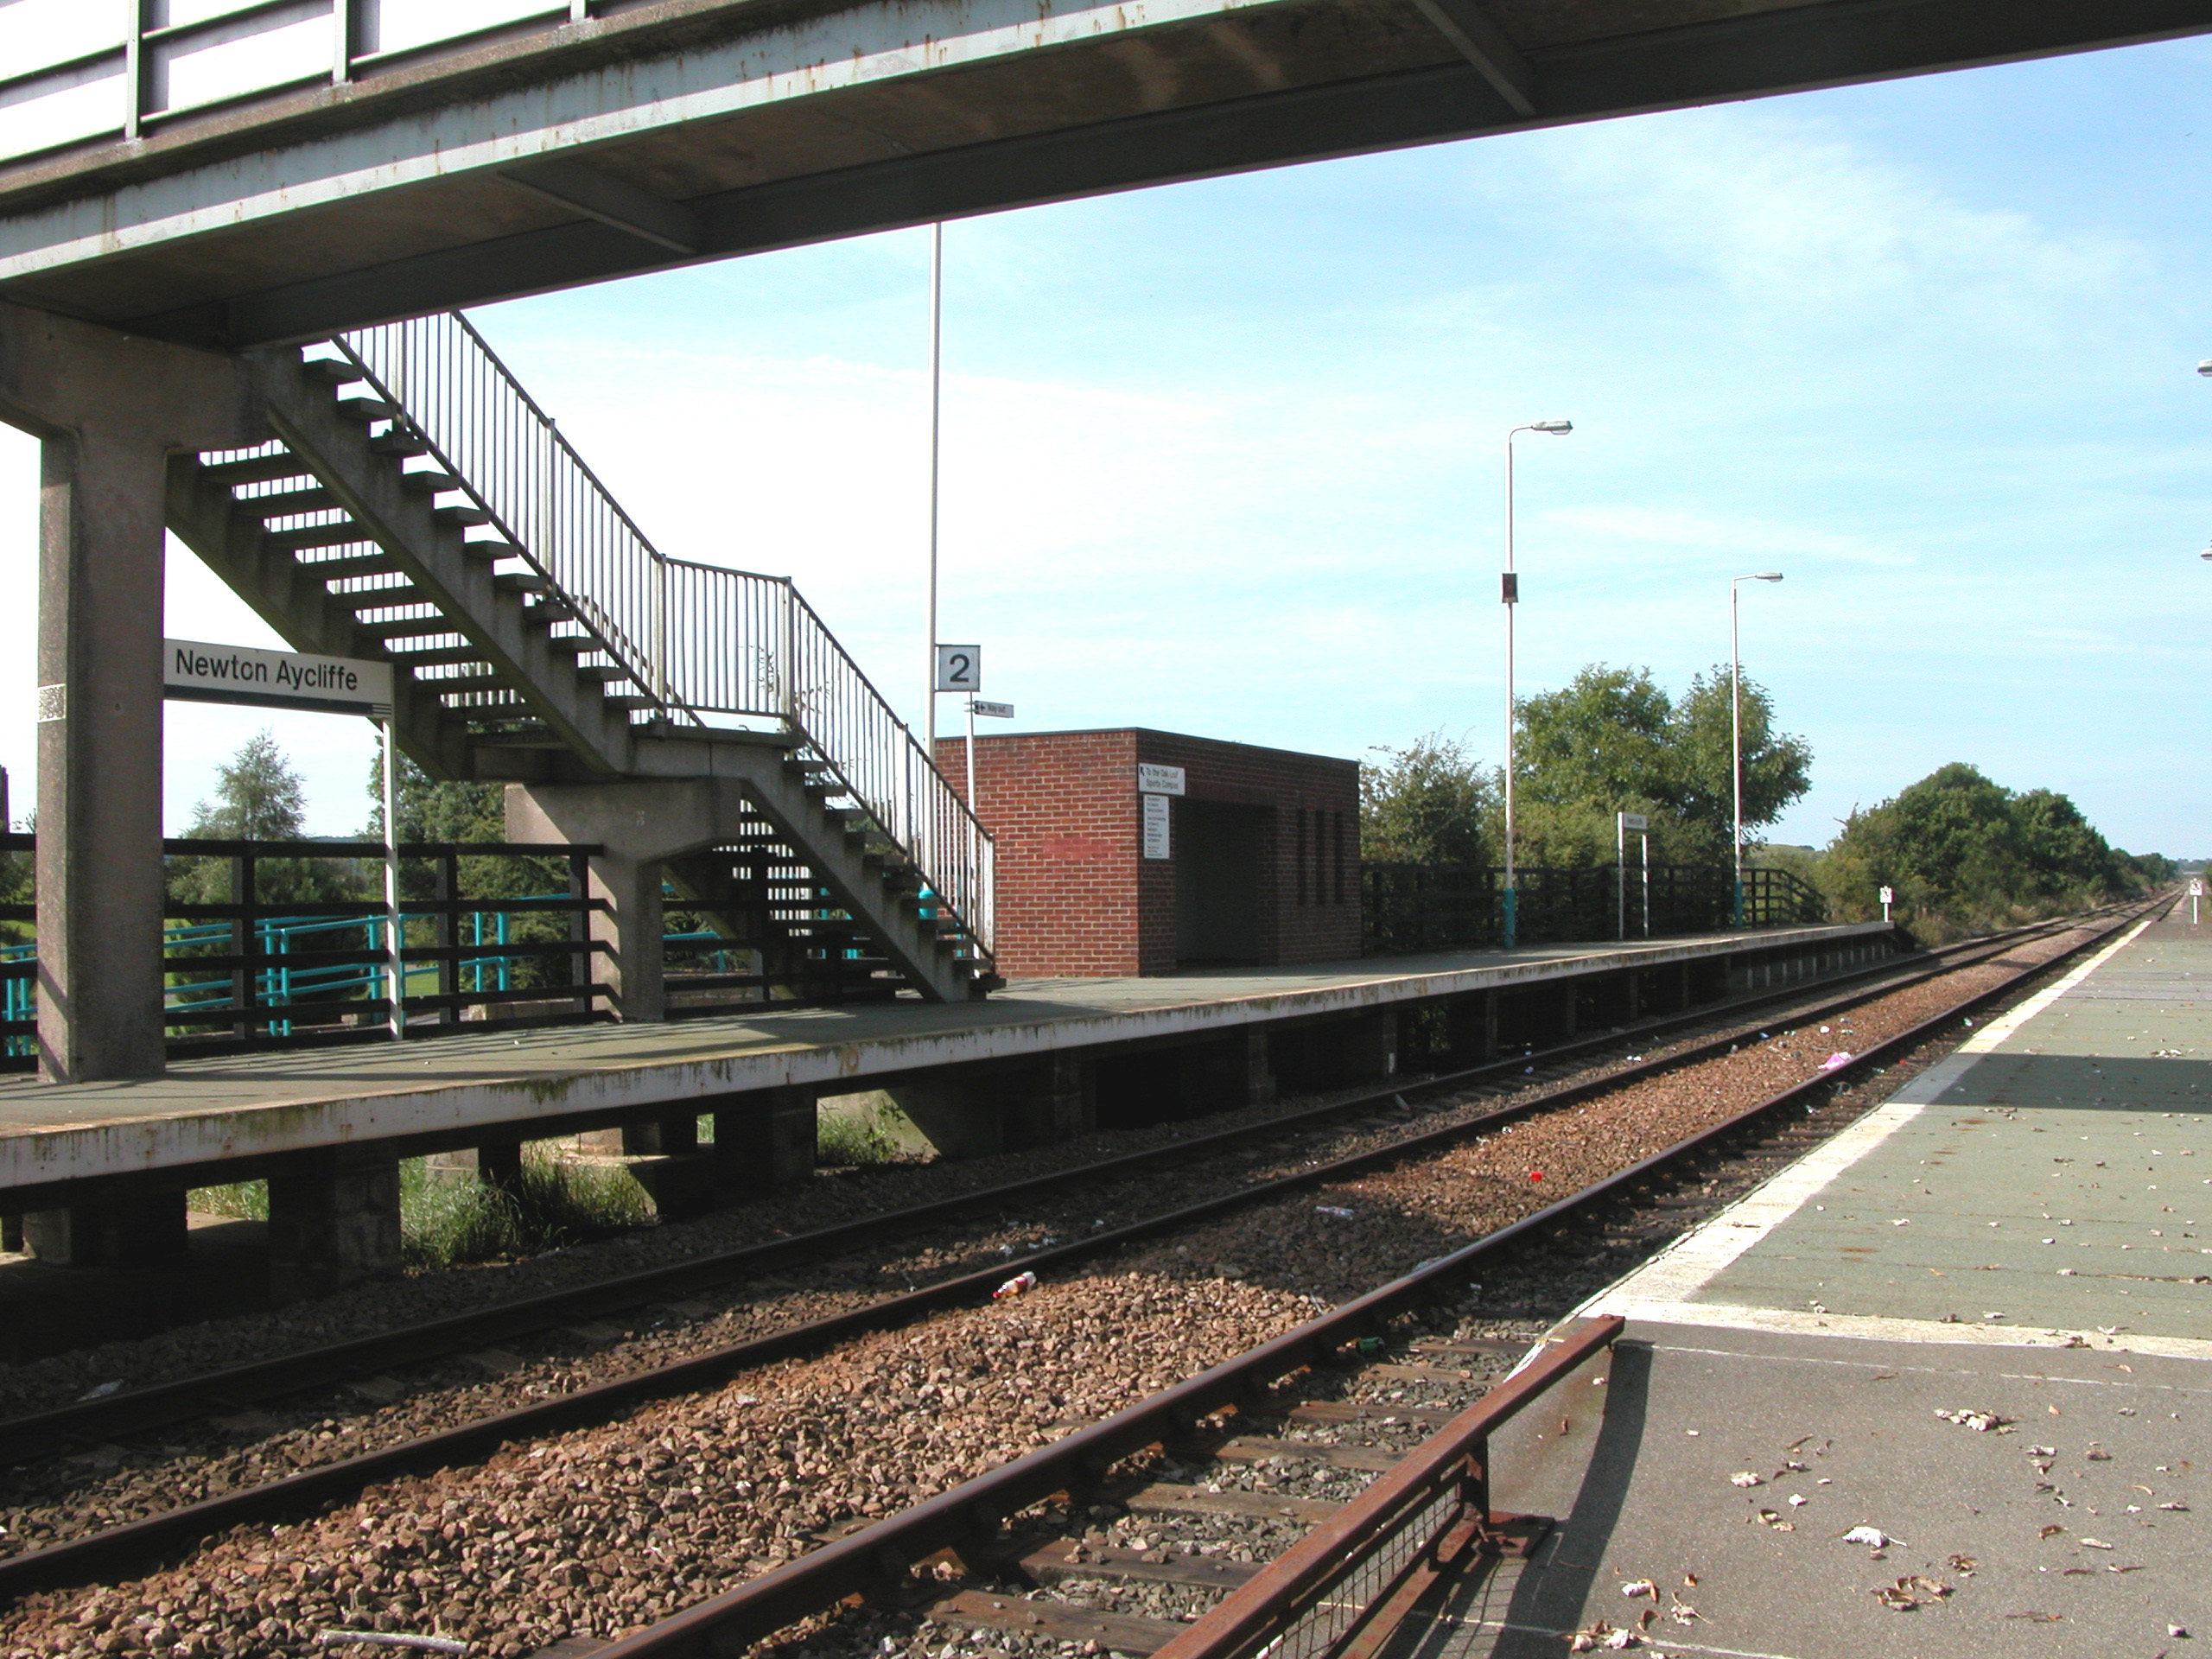 Great Opportunity for Aycliffe to Attract Railway Buffs